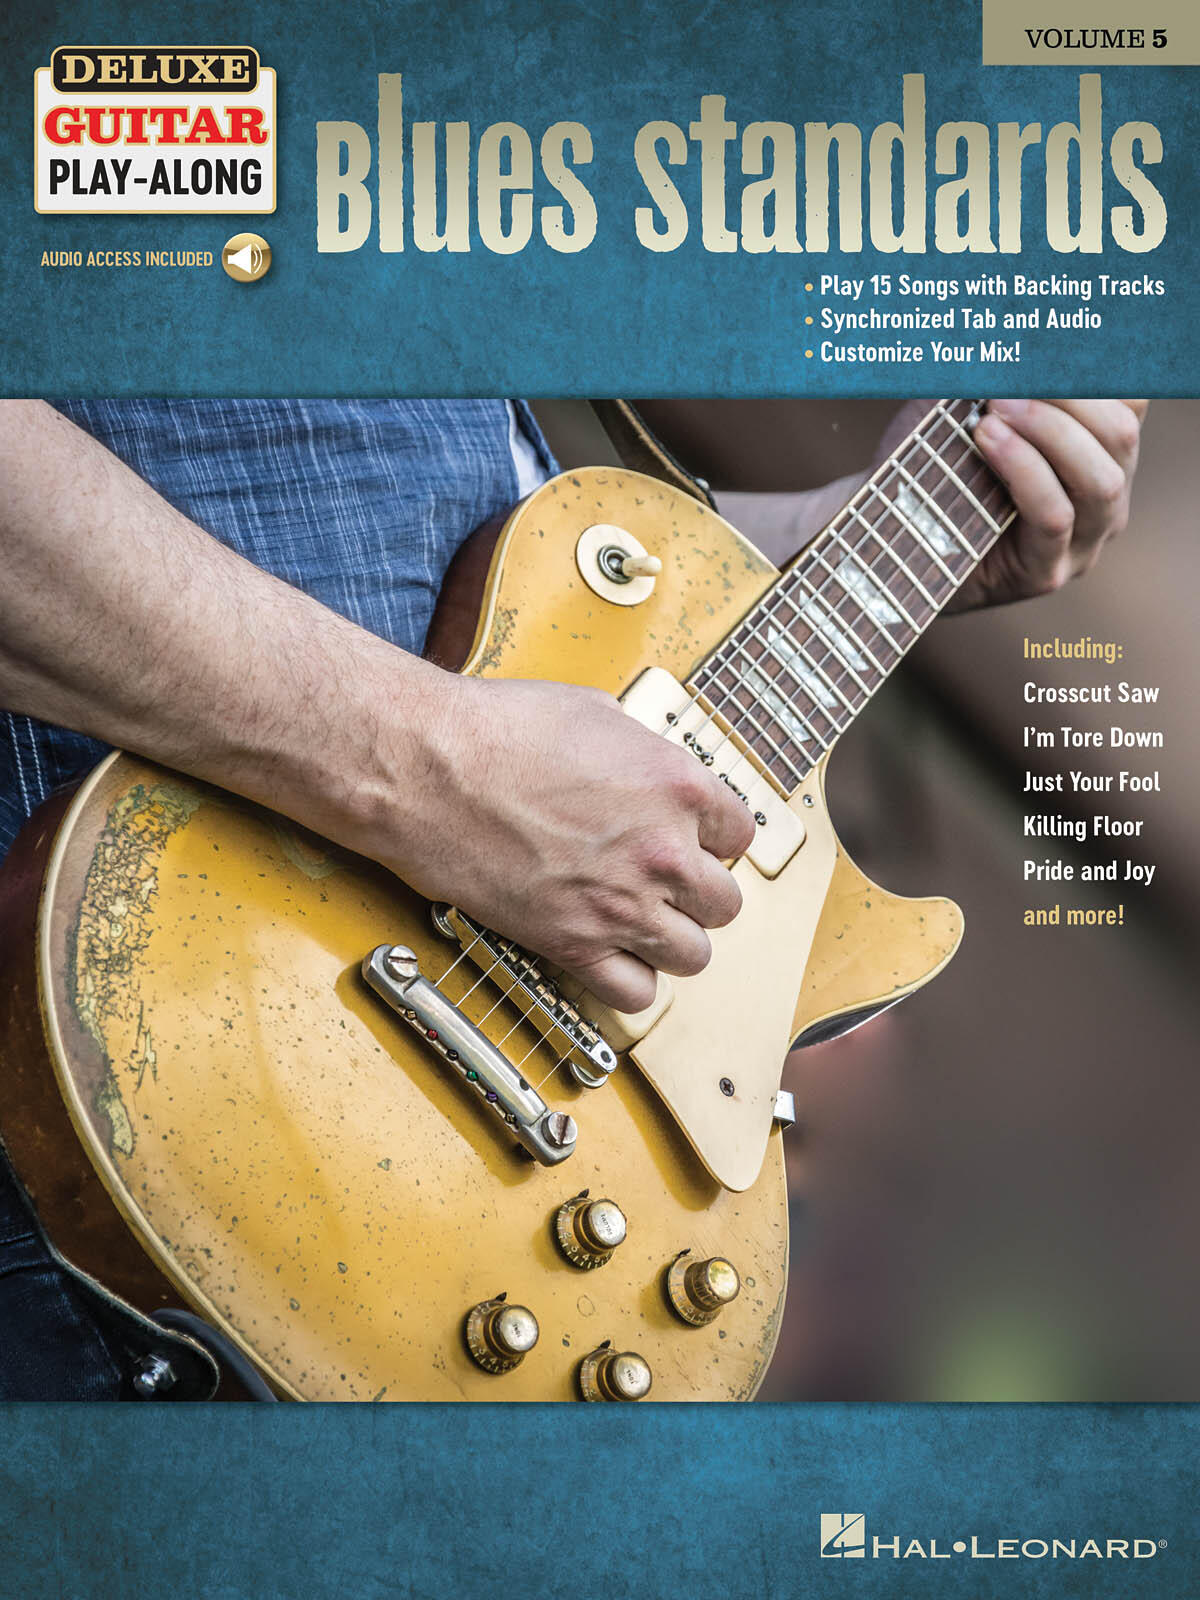 Blues Standards Deluxe Guitar Play-Along Volume 5 : photo 1